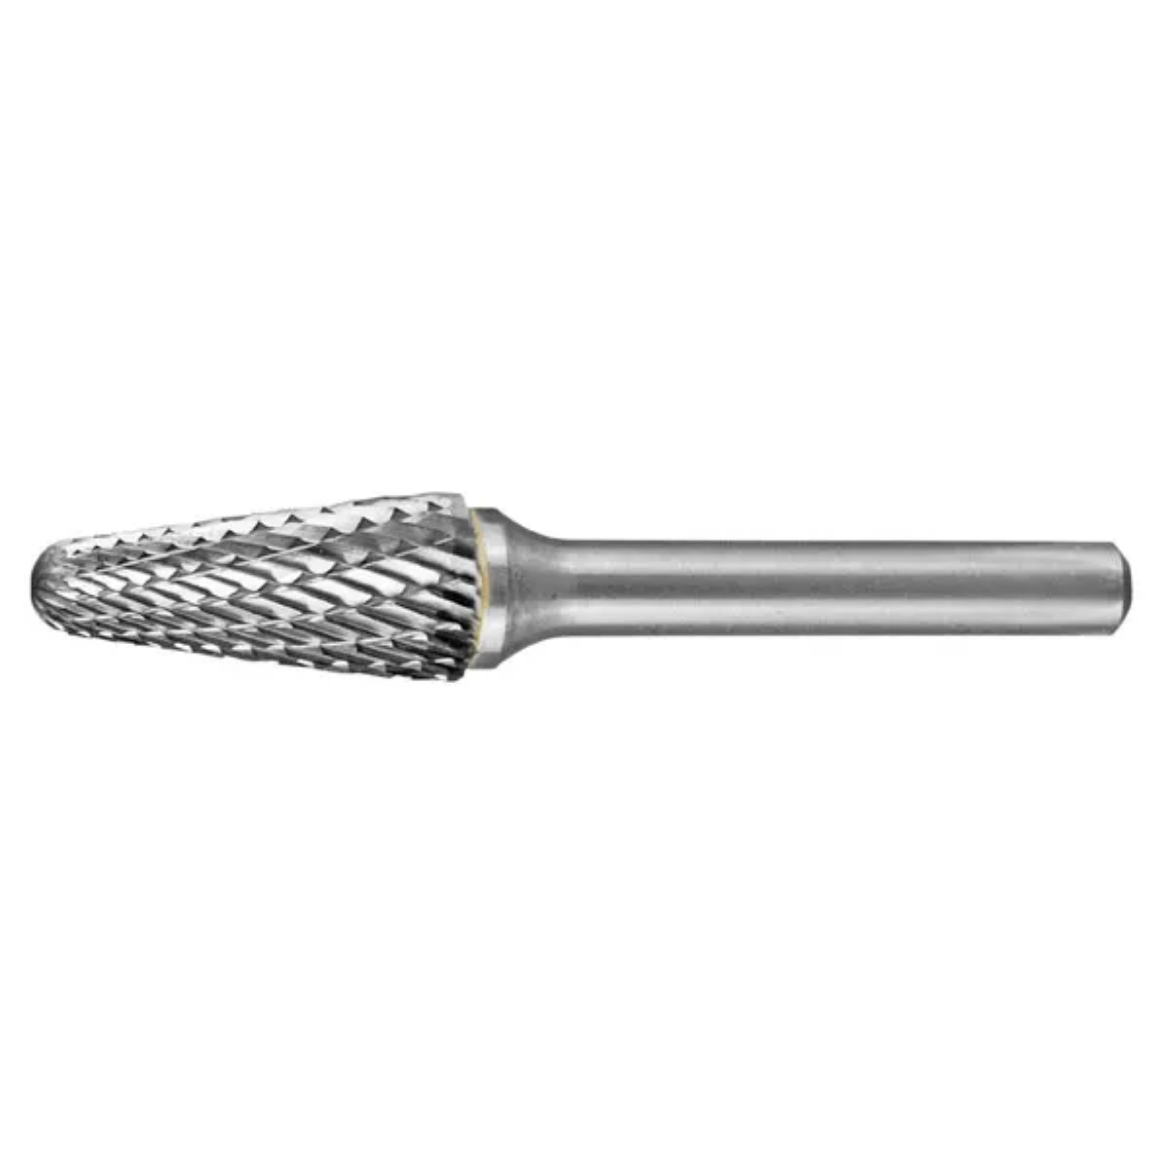 Picture of HOLEMAKER CARBIDE BURR, TAPERED RADIUS END, 1/4" X 5/8" HEAD, 1/4" SHANK DC